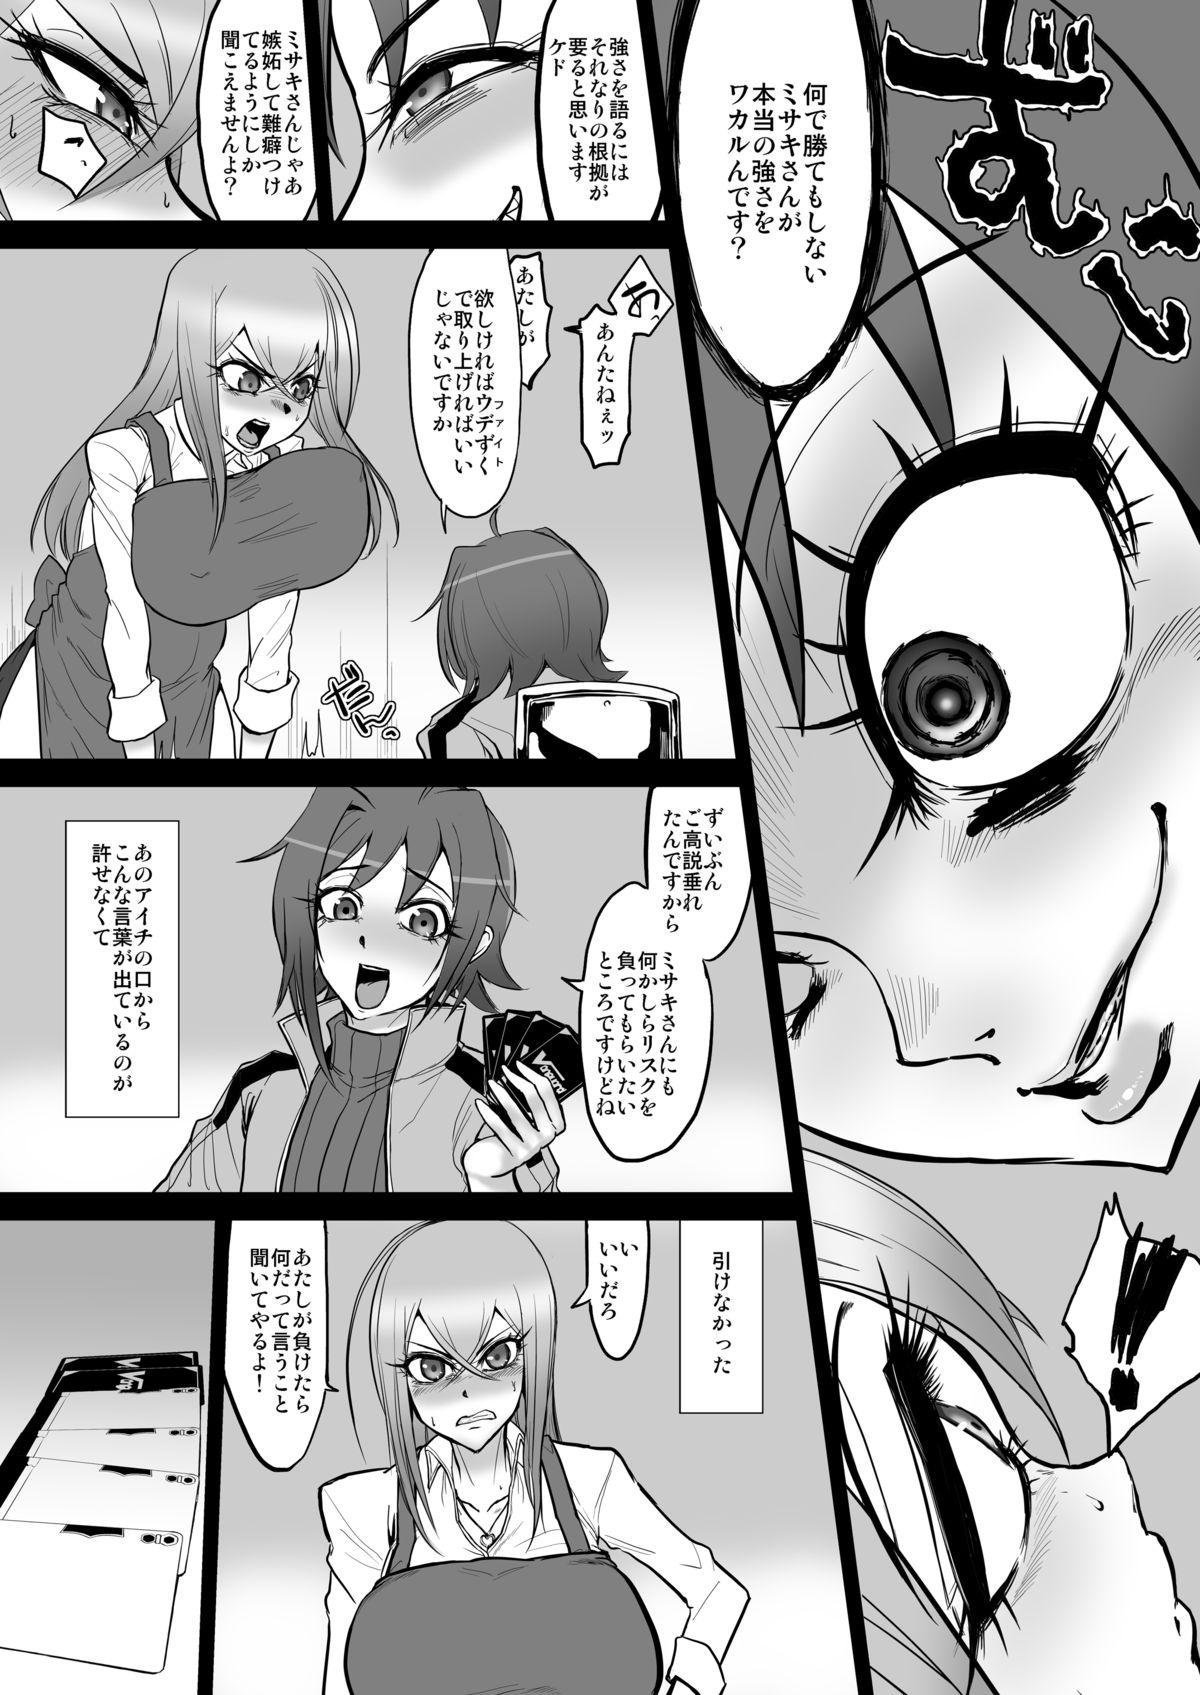 Pale Bind!! - Cardfight vanguard Tiny Tits - Page 6